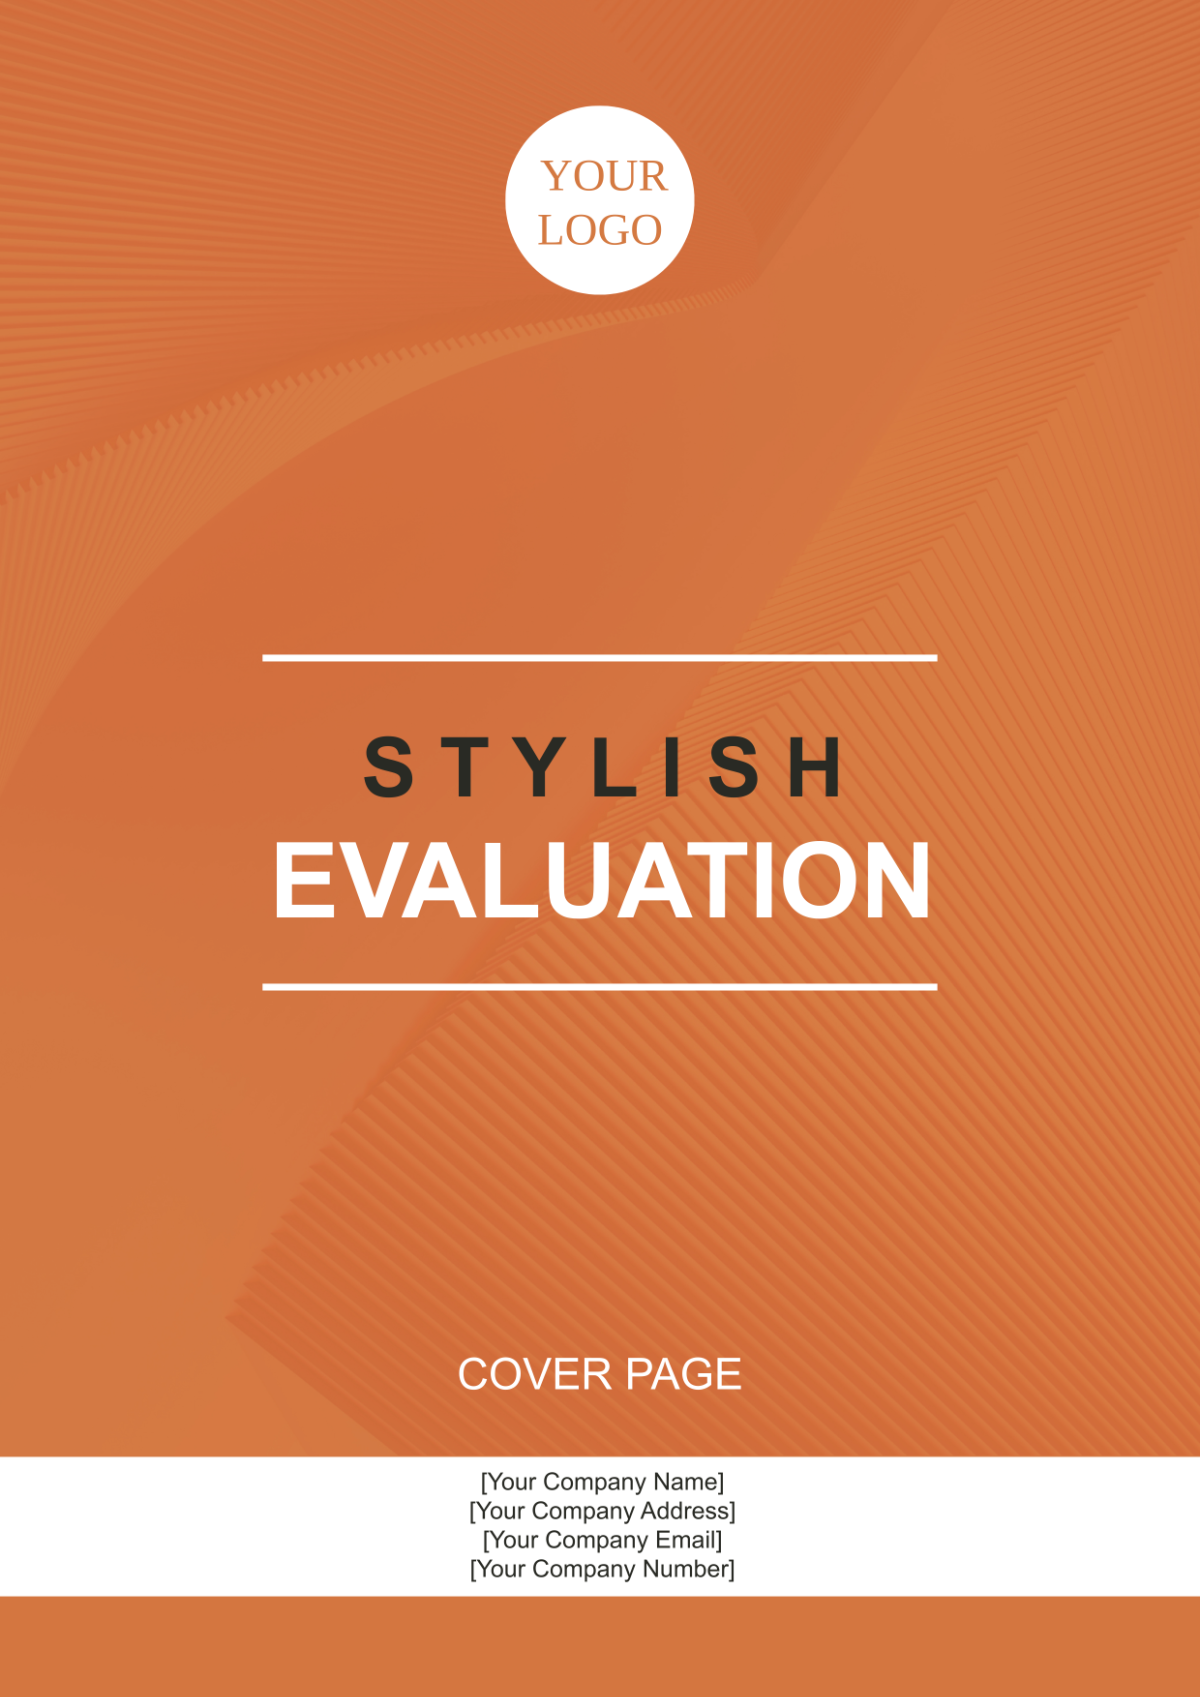 Stylish Evaluation Cover Page